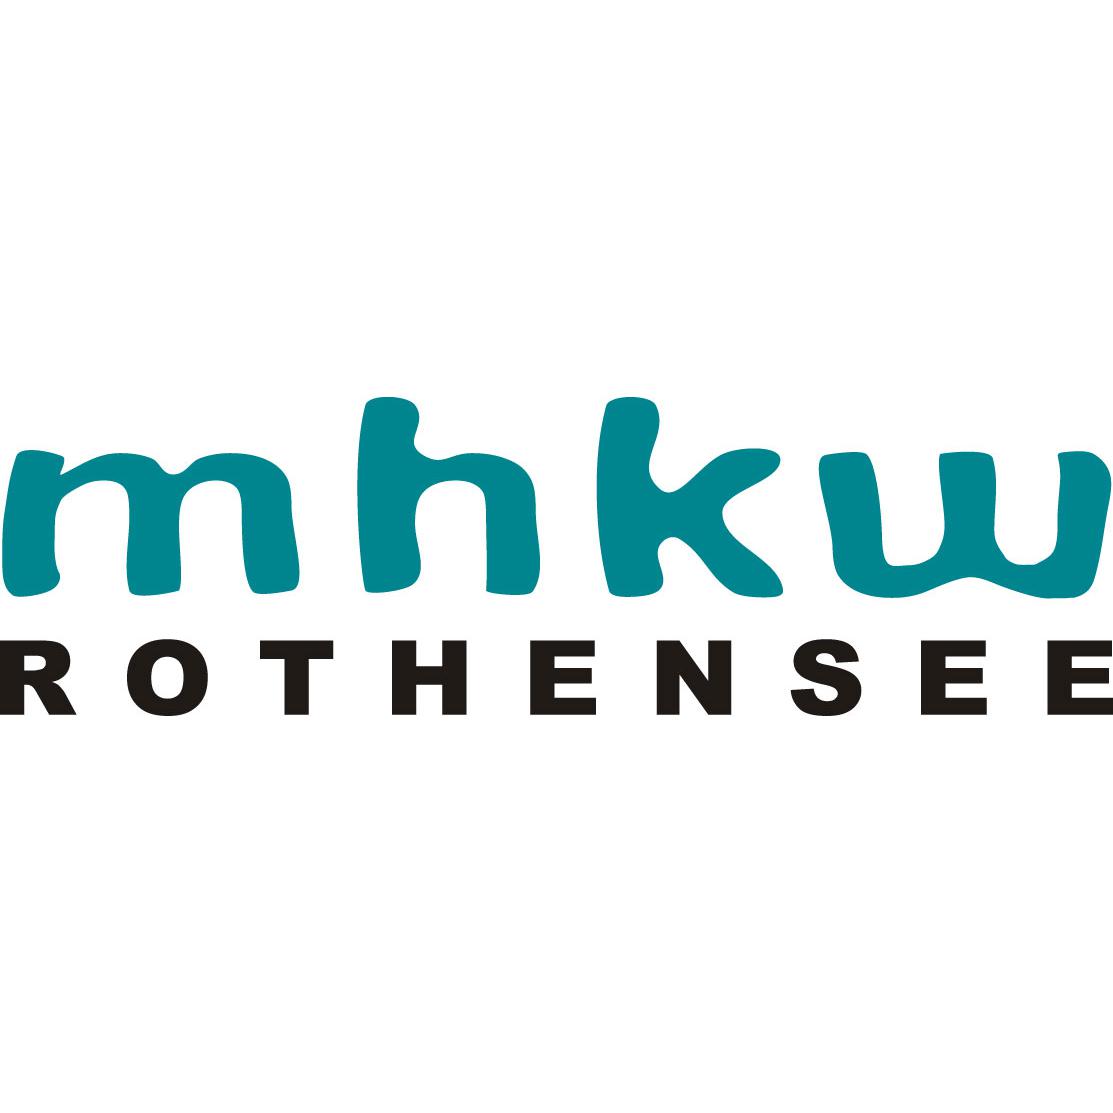 MHKW Rothensee GmbH